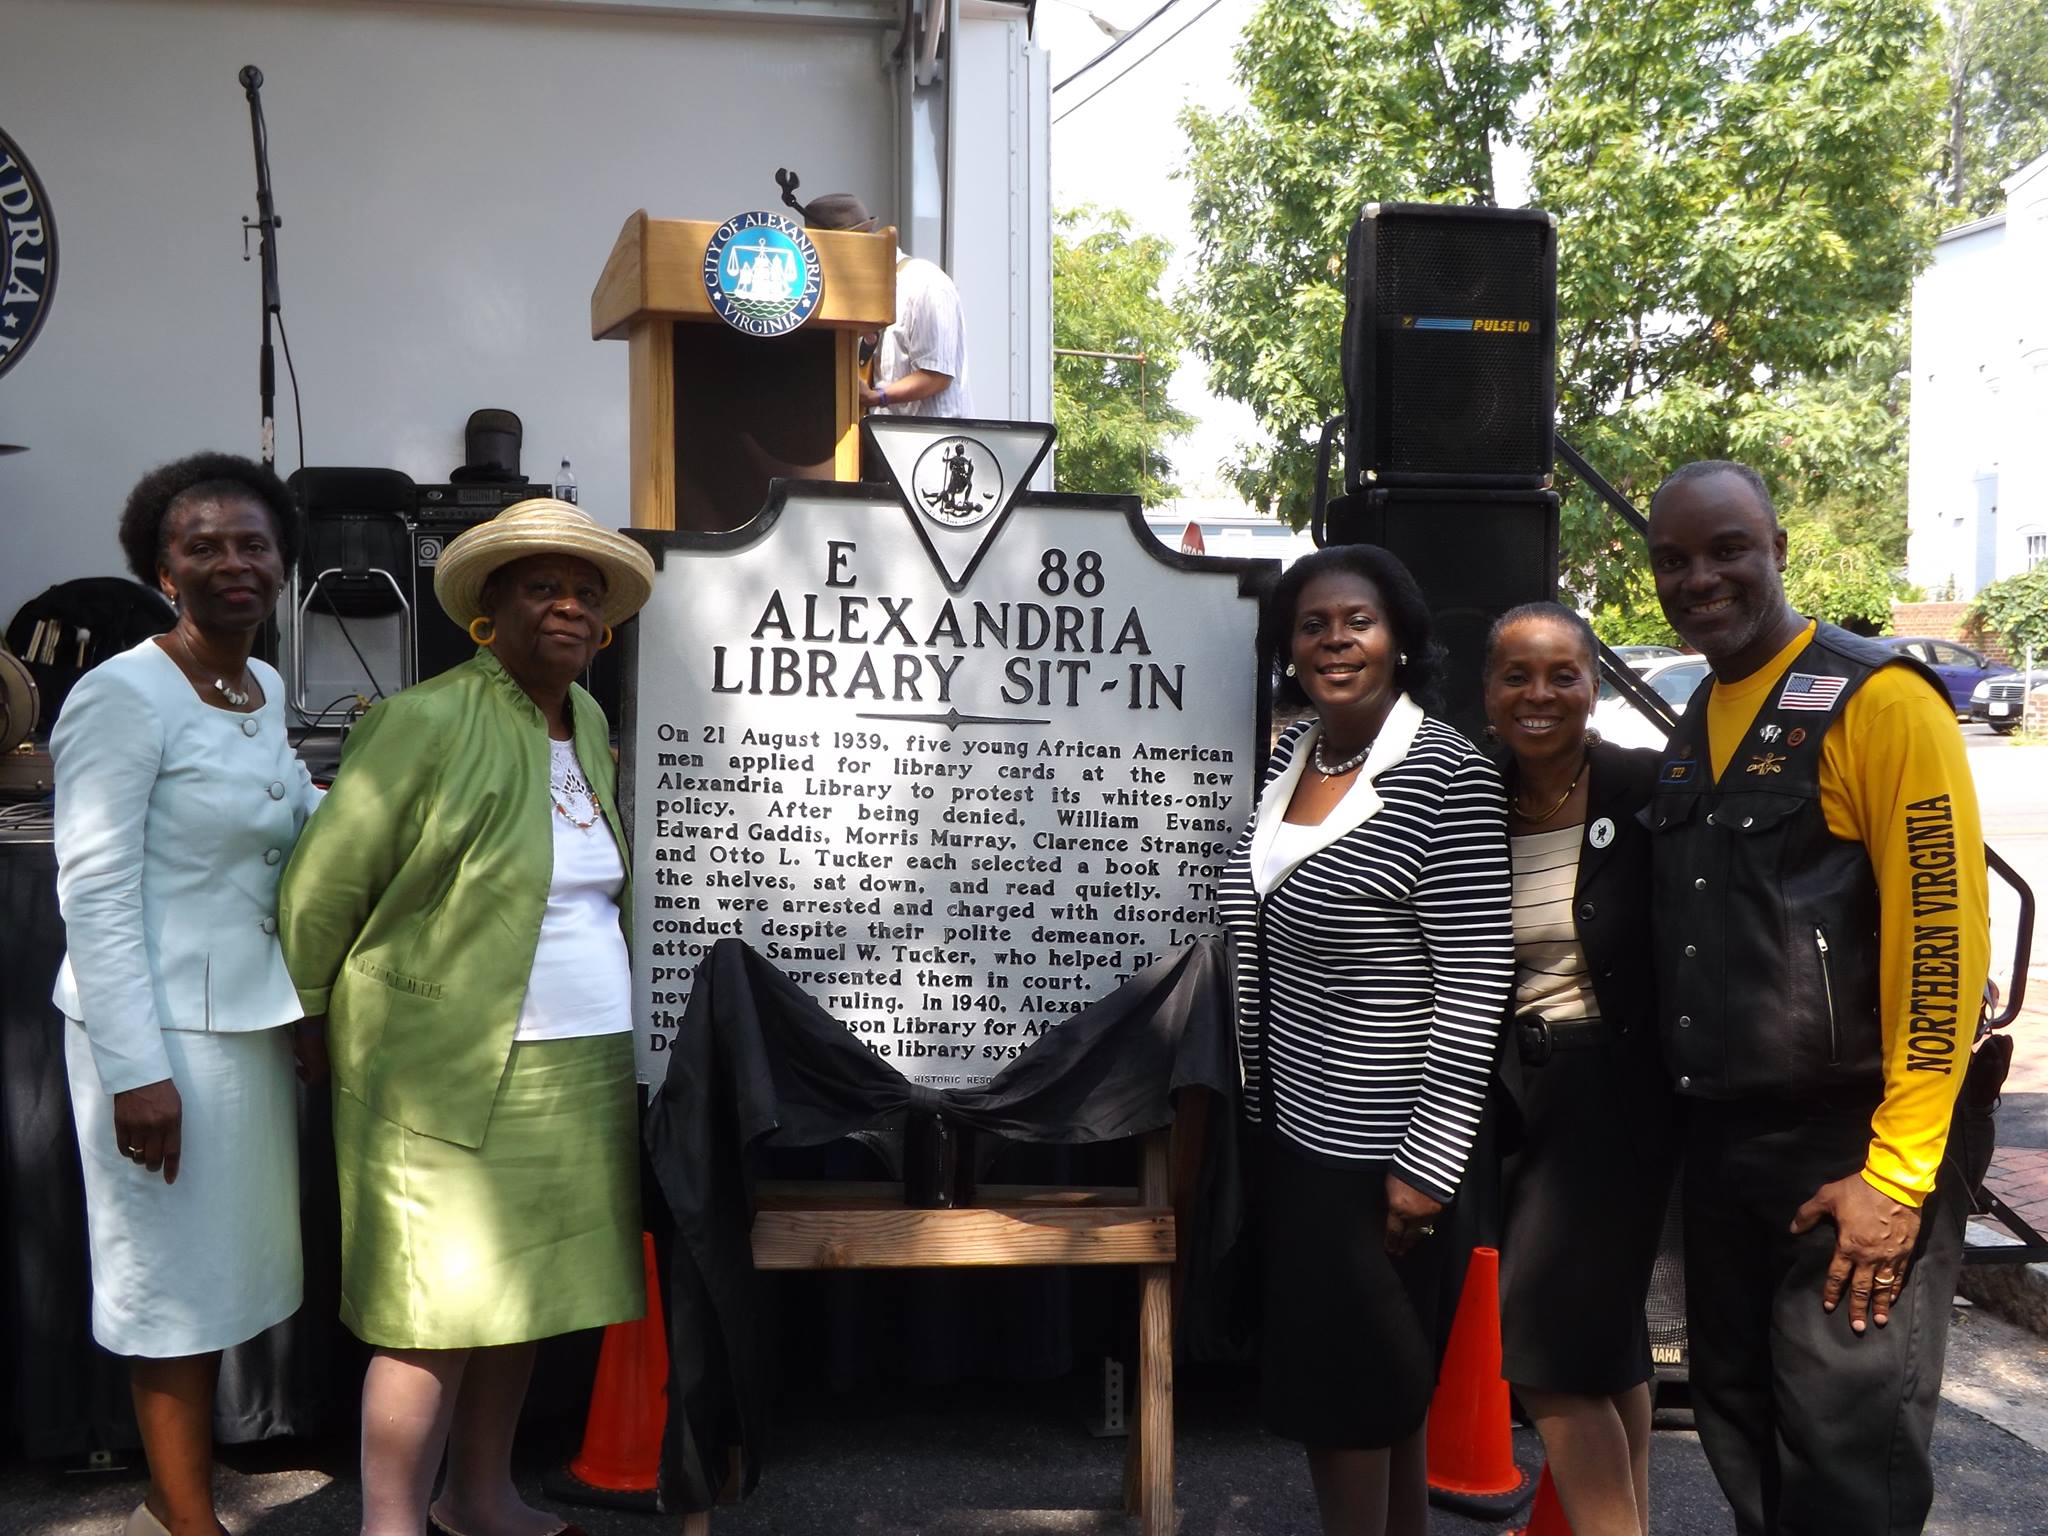 In 2014 the Alexandria Library honored the 75th anniversary of the first library sit-in 